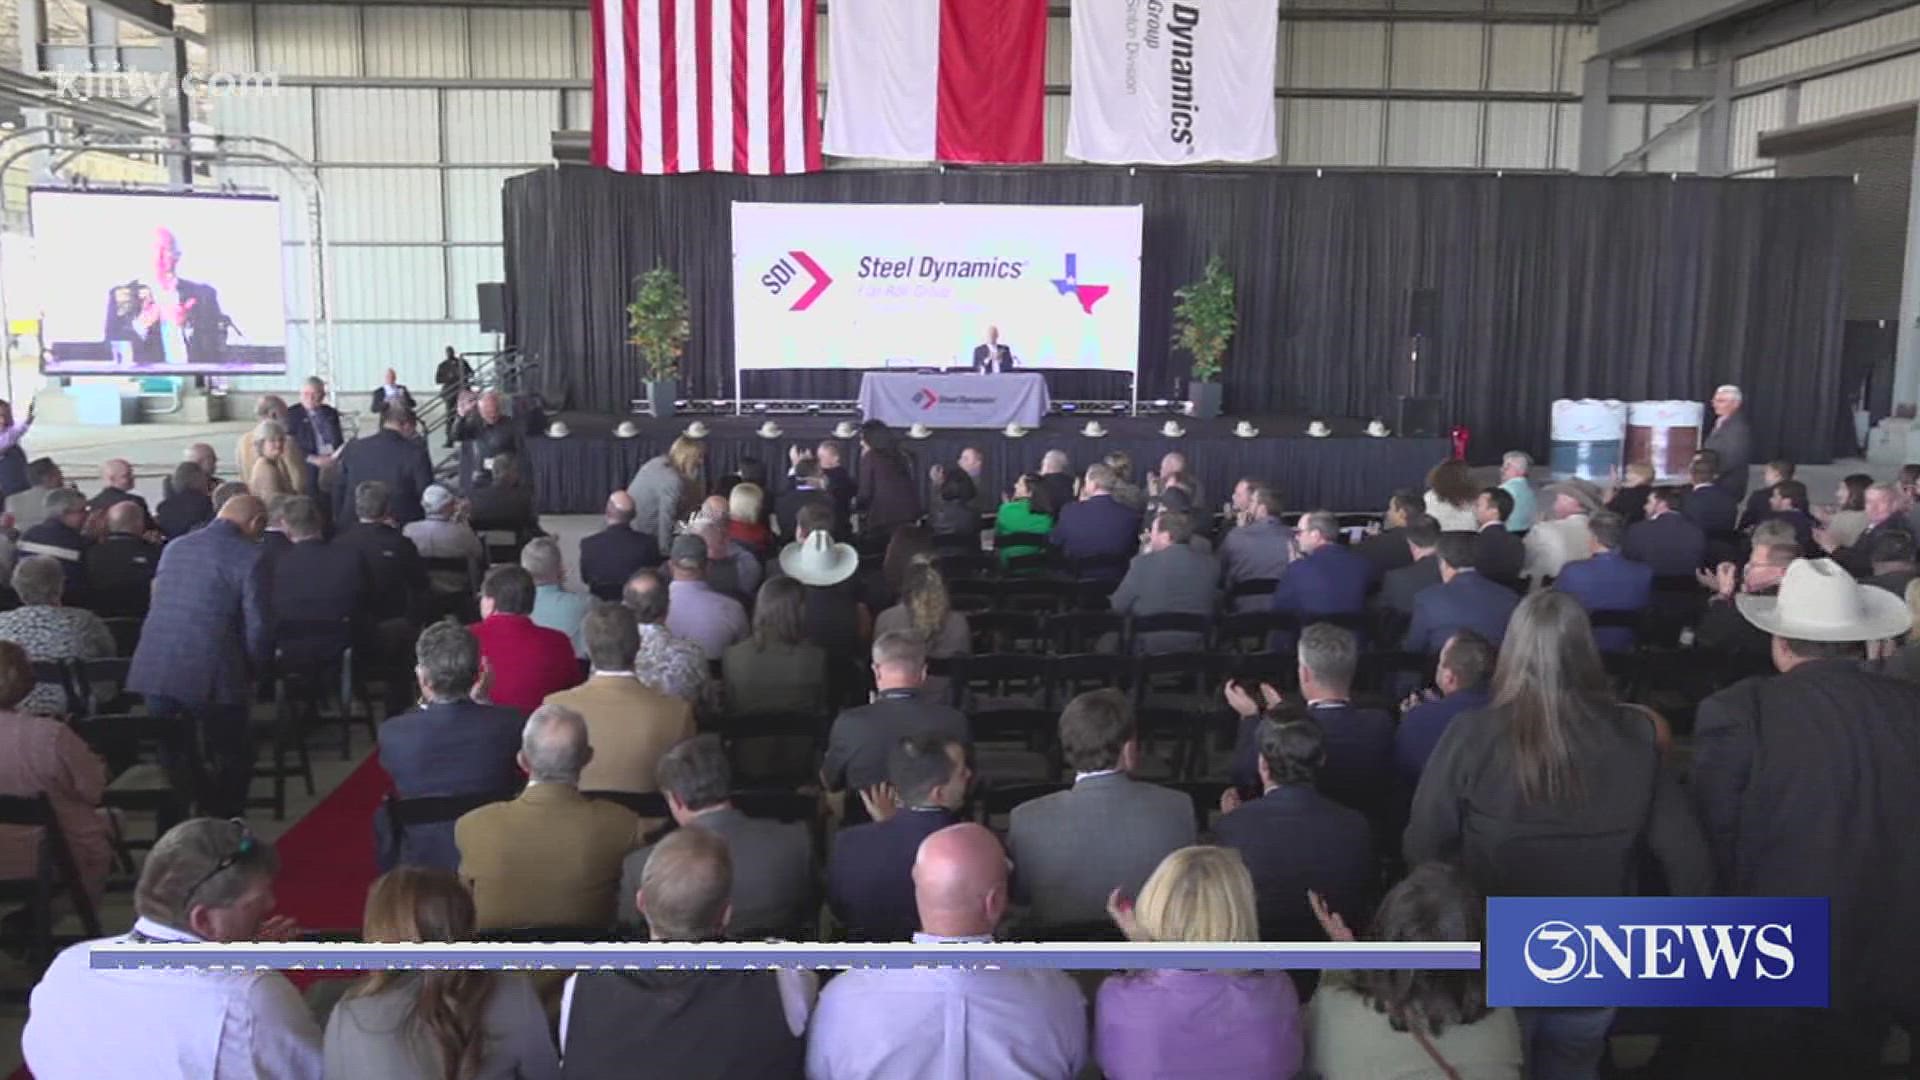 The new facility is set to create over 590 new jobs, and generate over $1.9 billion in capital investment.